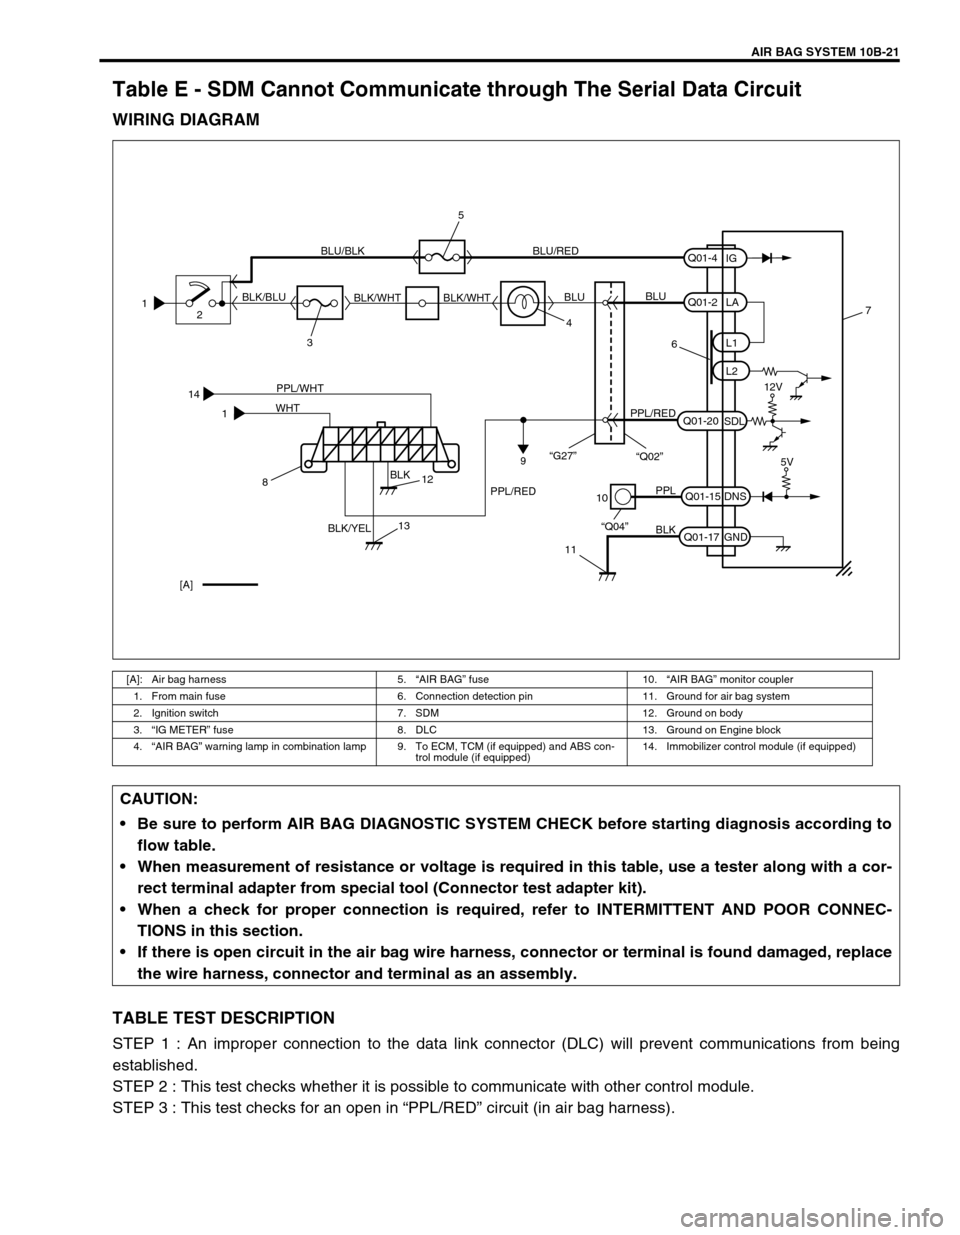 SUZUKI GRAND VITARA 2001 2.G Service Manual AIR BAG SYSTEM 10B-21
Table E - SDM Cannot Communicate through The Serial Data Circuit
WIRING DIAGRAM
TABLE TEST DESCRIPTION
STEP 1 : An improper connection to the data link connector (DLC) will preve